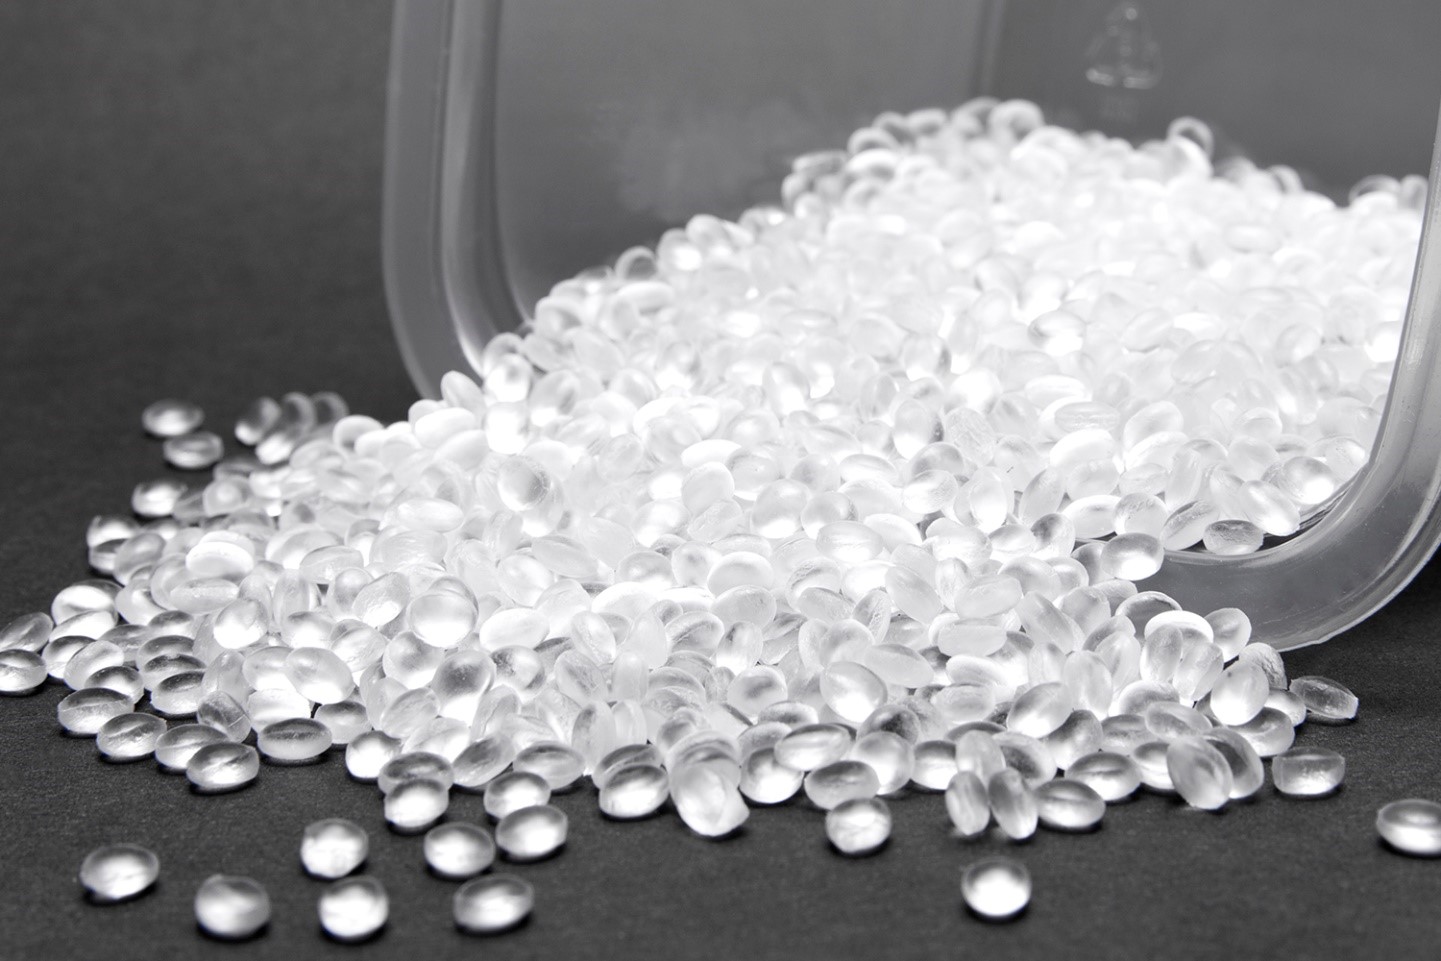 General information about HDPE